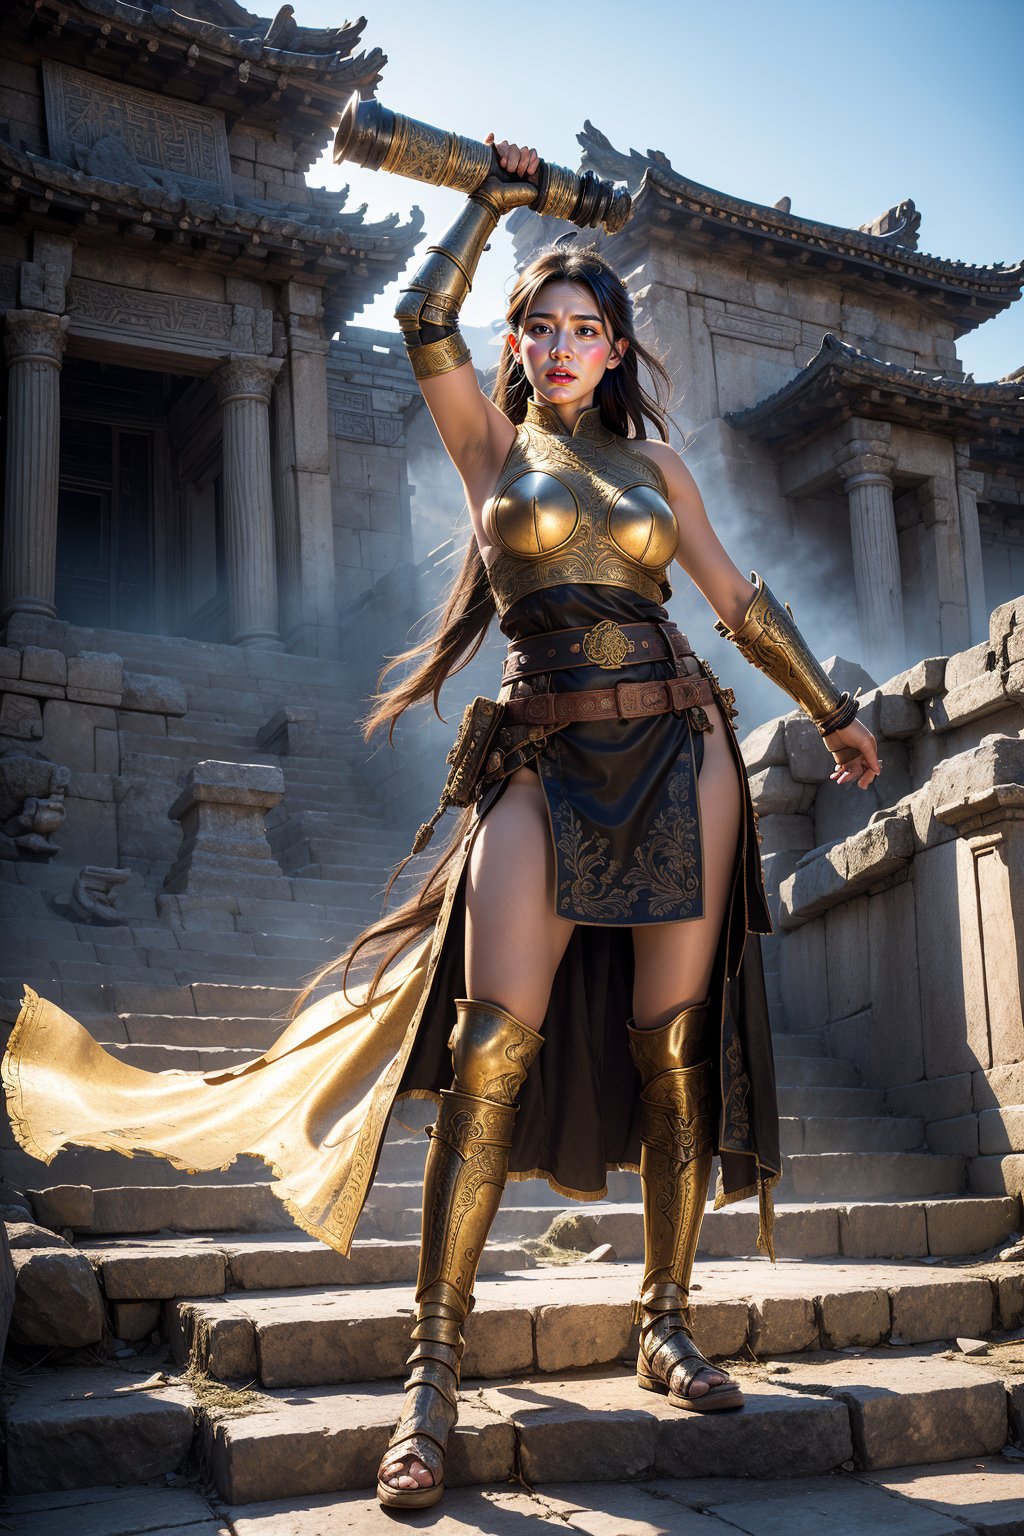 A warrior maiden stands triumphantly before crumbling temple remnants, her weathered leather armor and ornate belt flapping in the breeze as she brandishes her majestic katana, its radiant curve refracting the golden light onto the ancient stone staircase, where the warm glow casts a dramatic silhouette against the worn, history-etched stones.